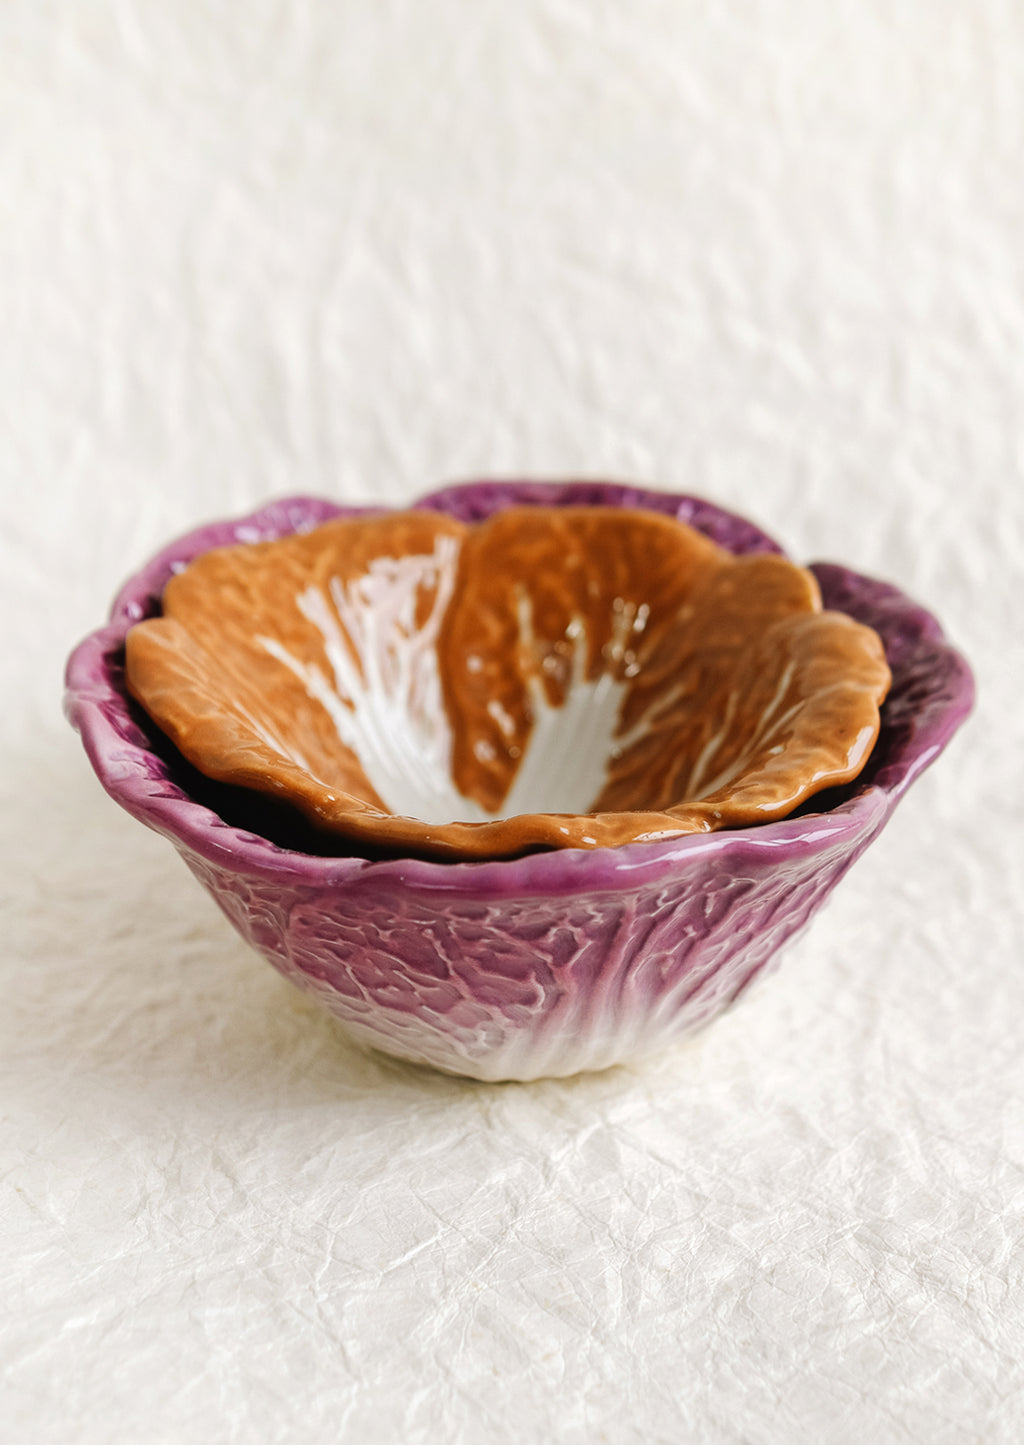 1: A pair of ceramic nesting bowls that look like orange and purple cabbage.